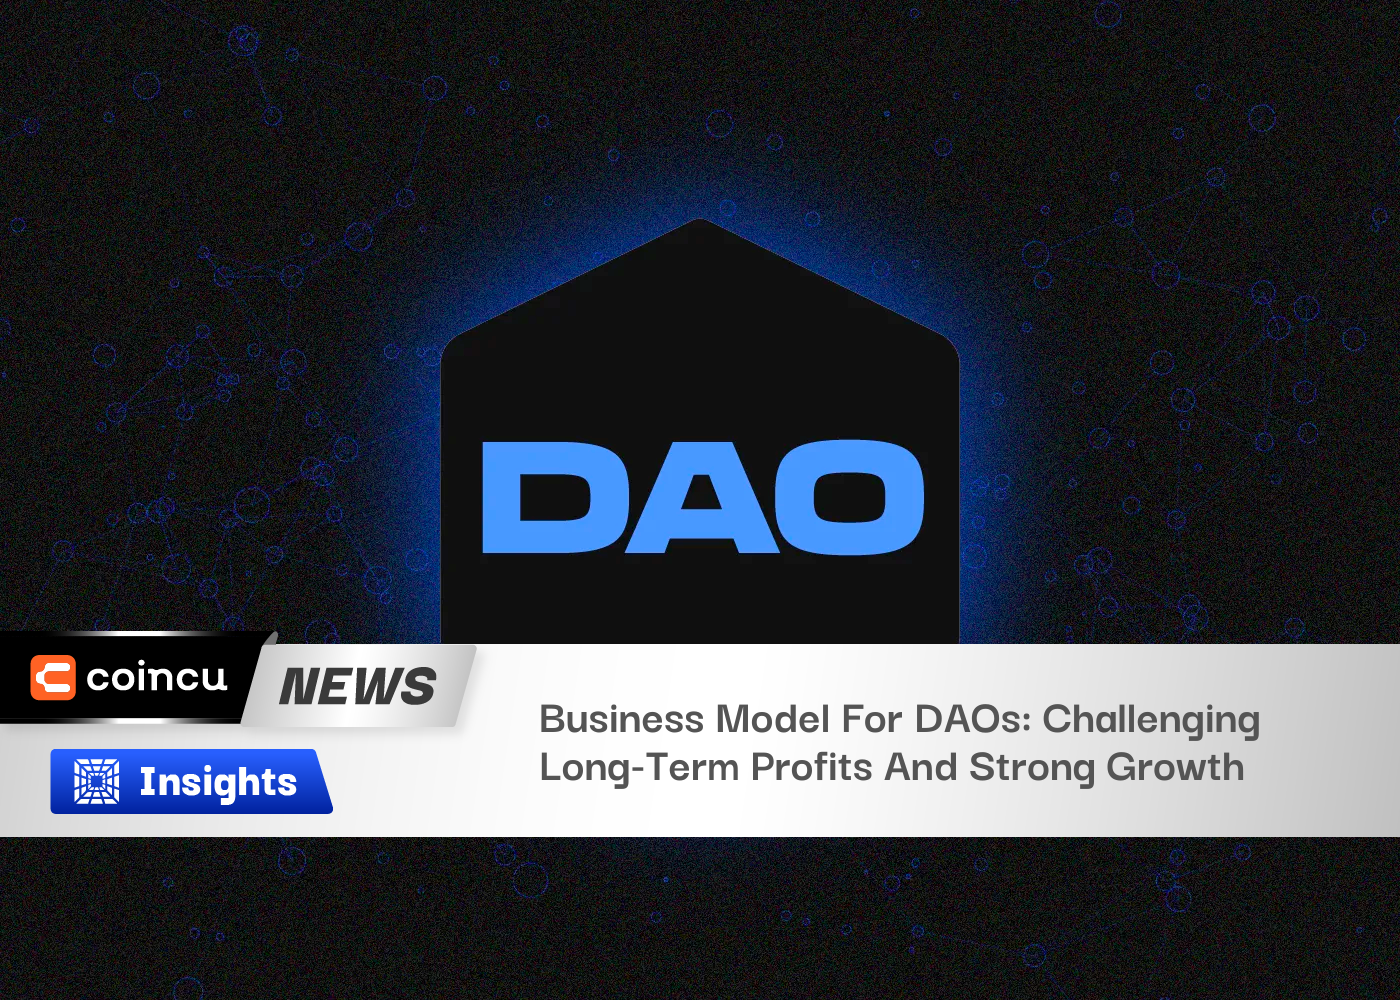 Business Model For DAOs: Challenging Long-Term Profits And Strong Growth